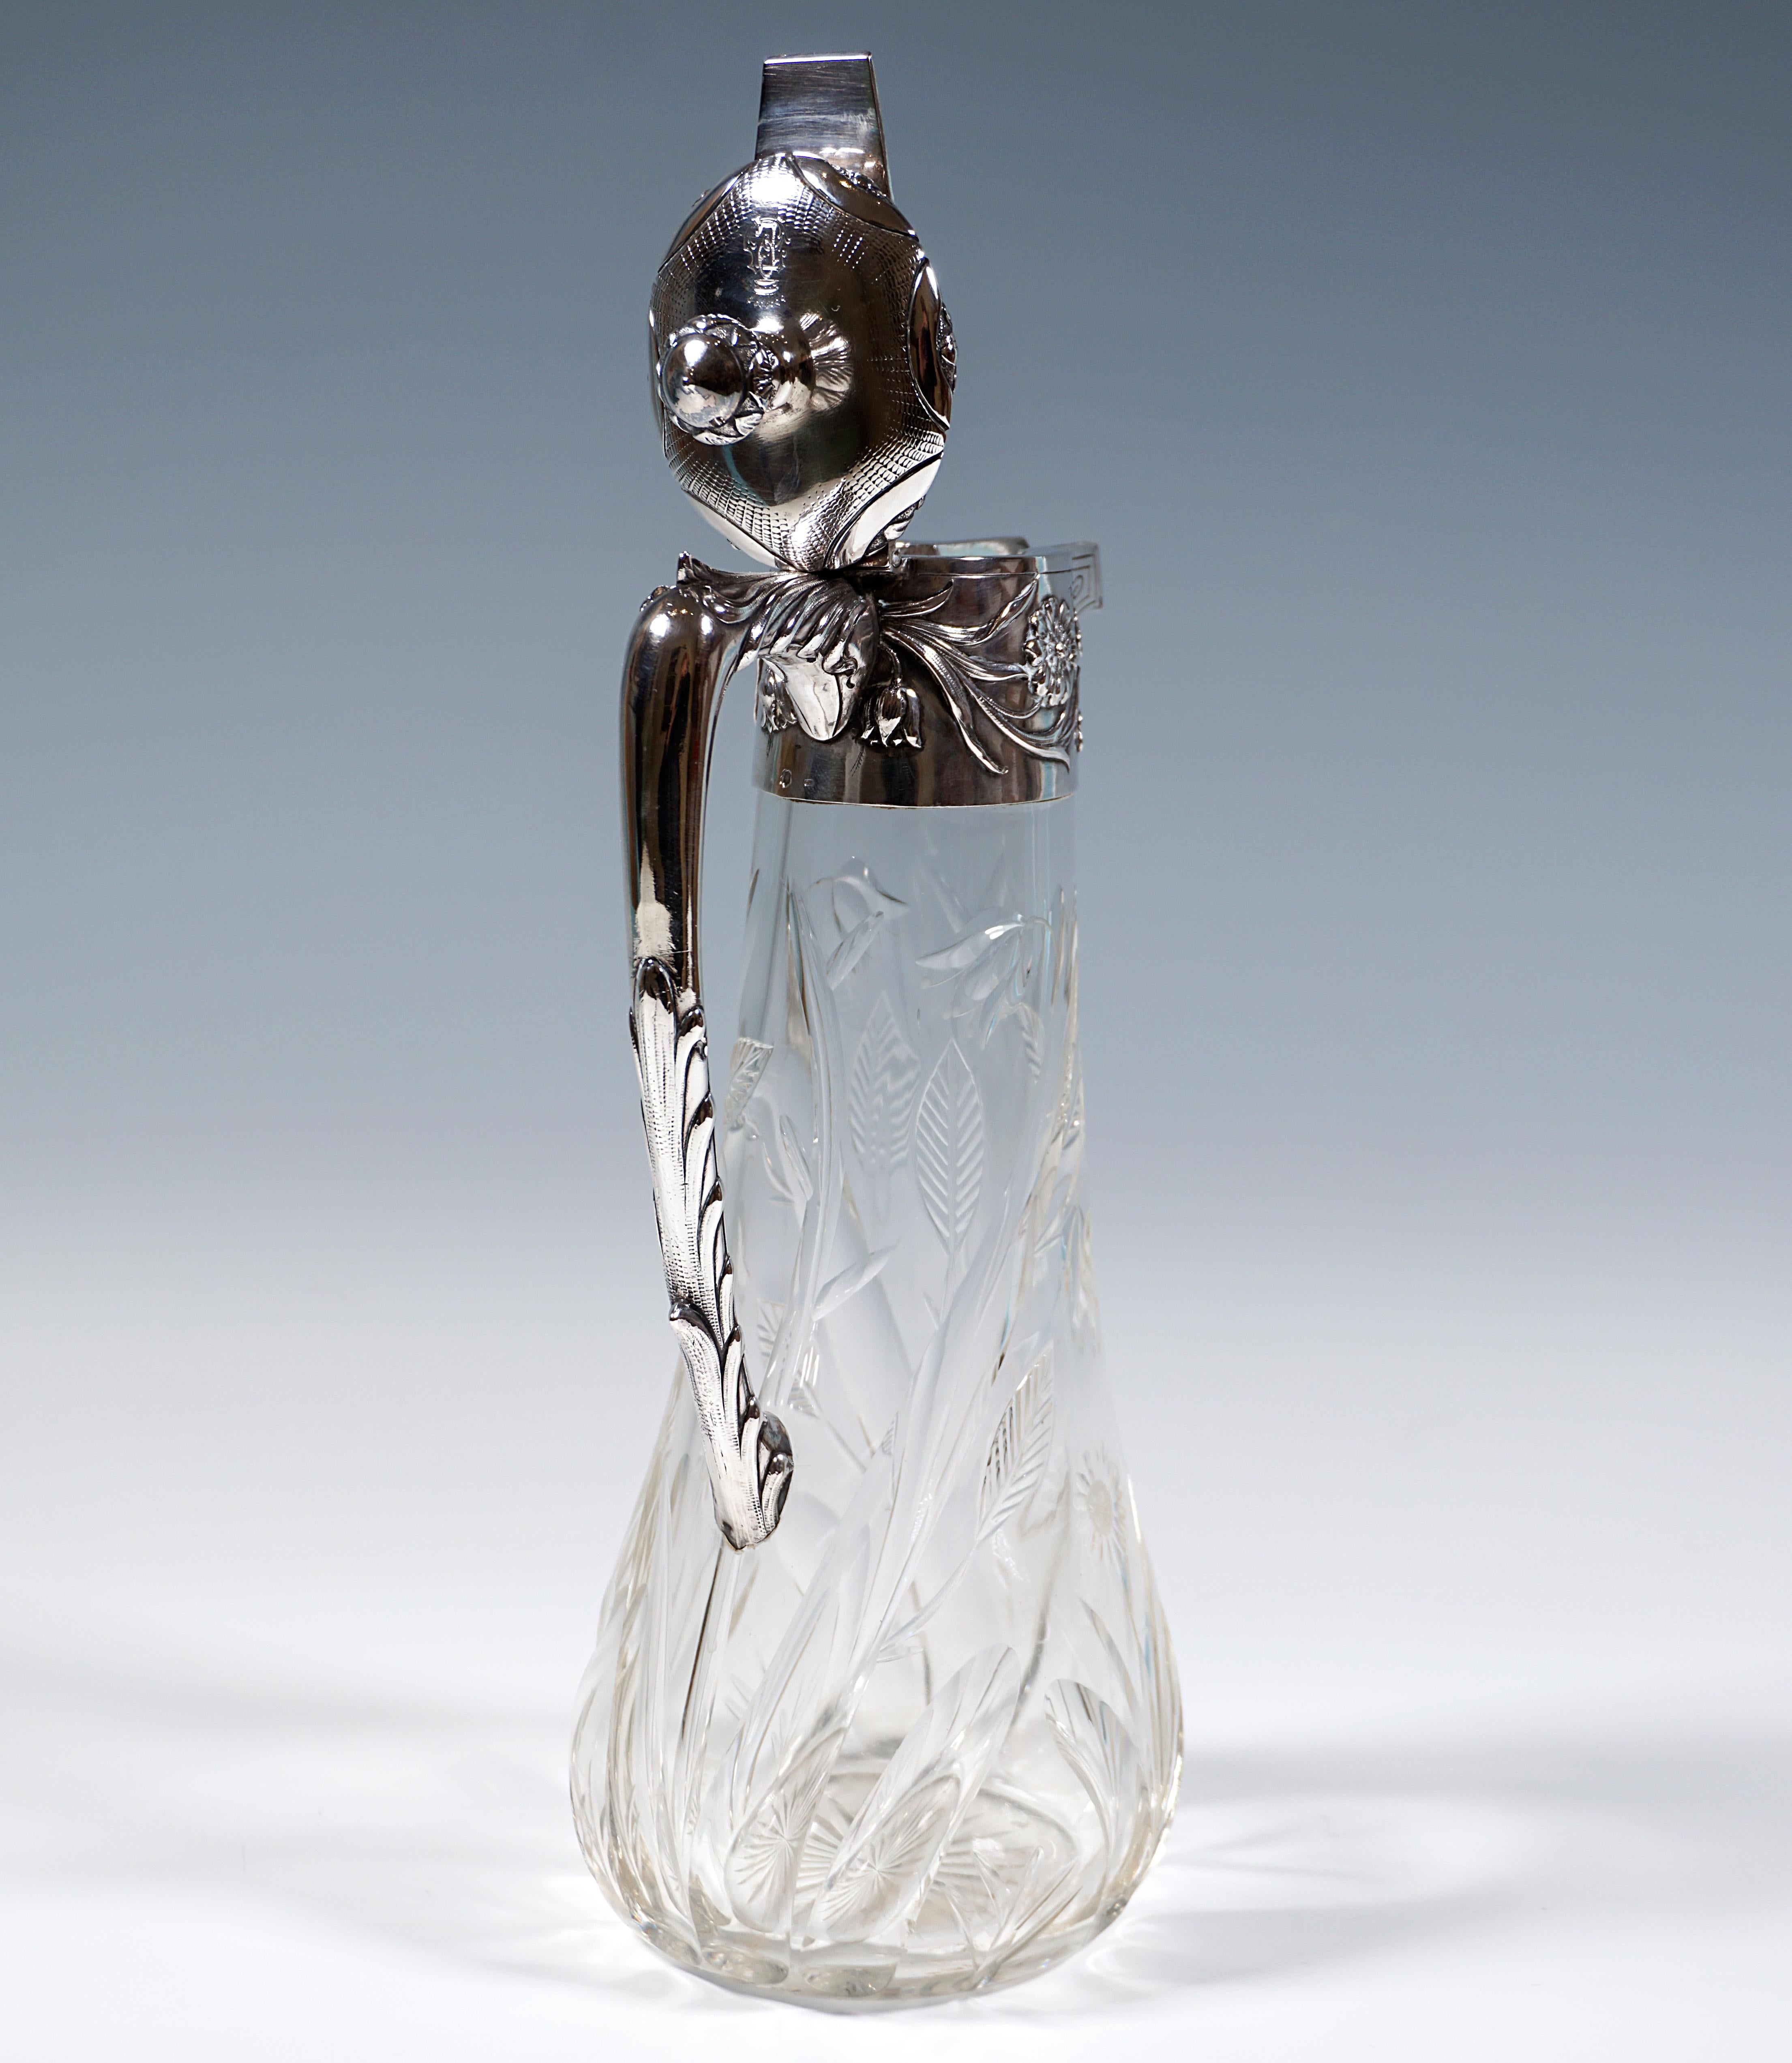 Hand-Crafted Art Nouveau Cut Glass Carafe With Silver Mount, by Vincenz Carl Dub, Vienna 1900 For Sale